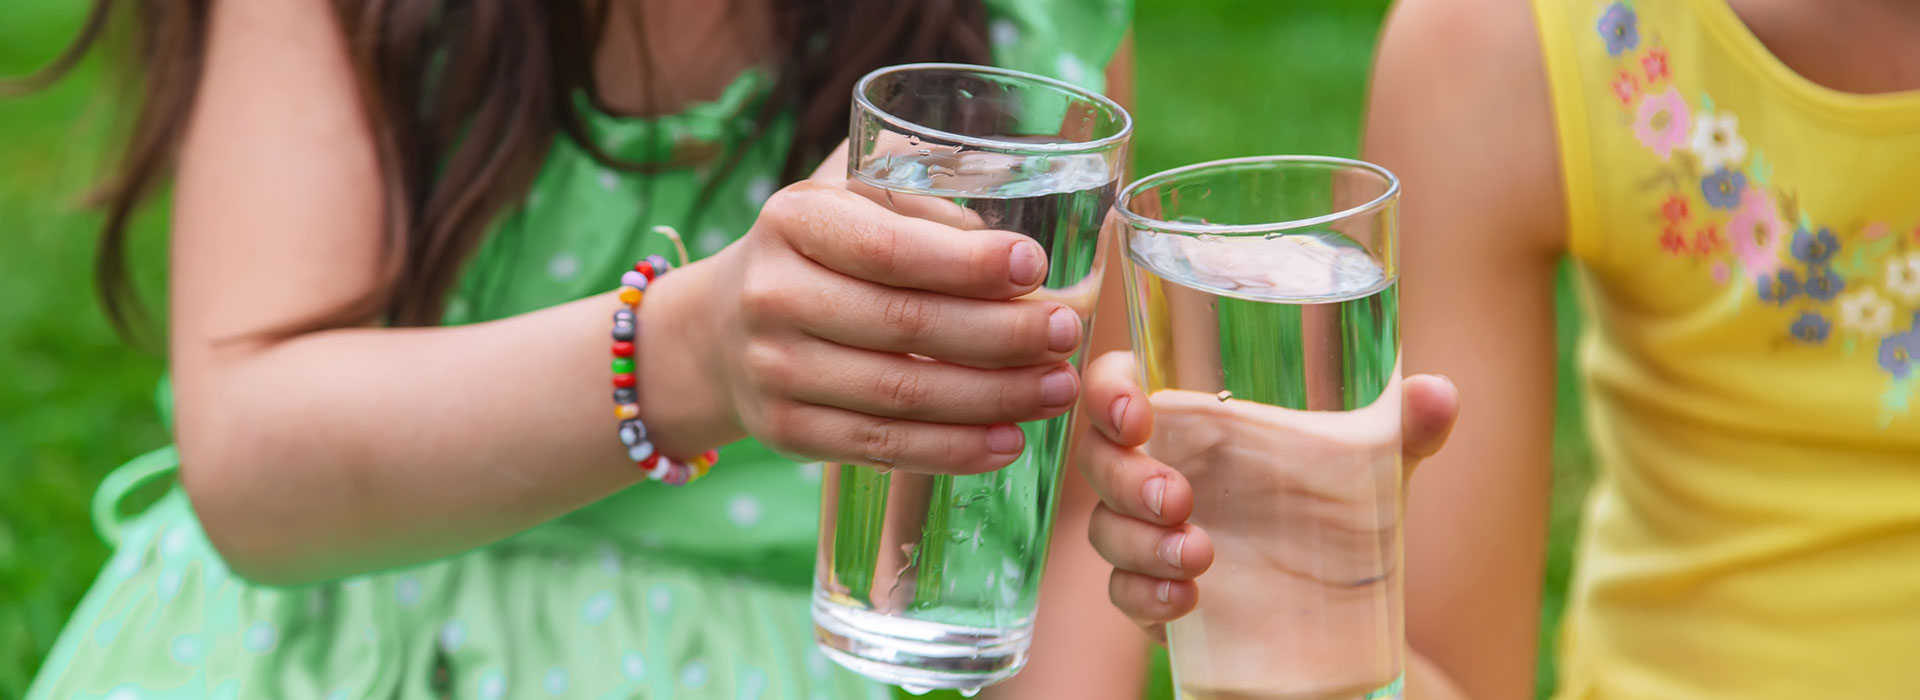 image of young girl drinking a glass water